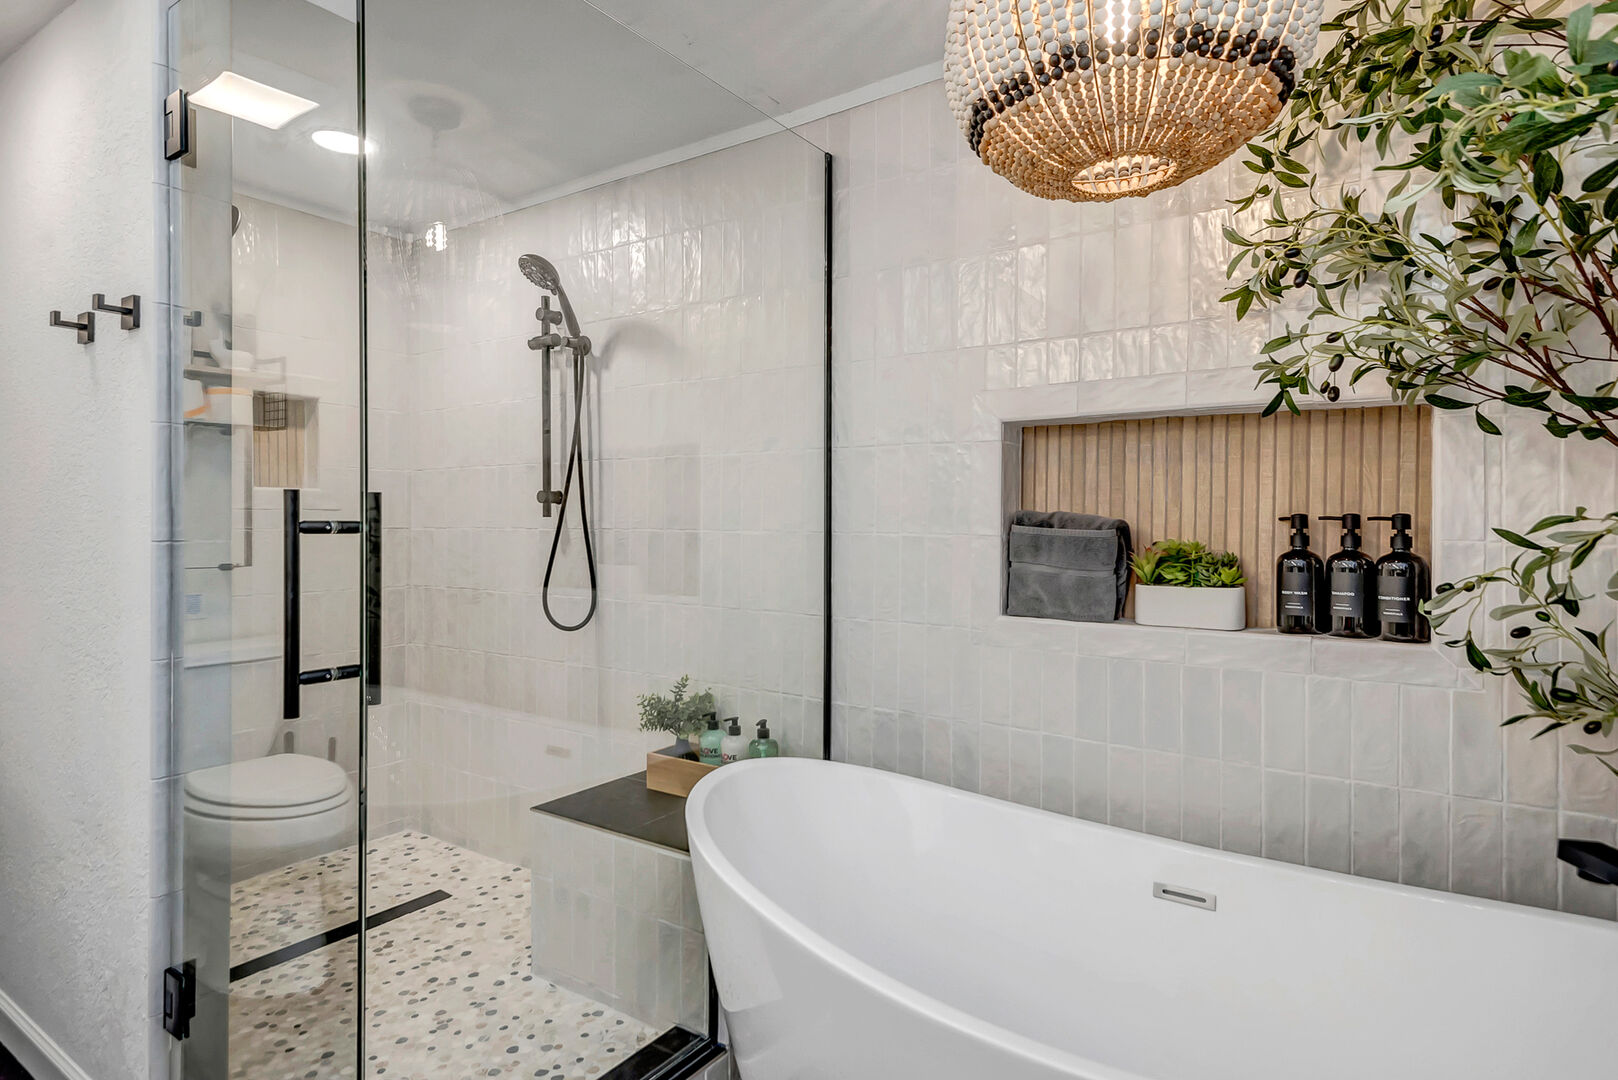 Walk-in shower equipped with a rainfall shower head